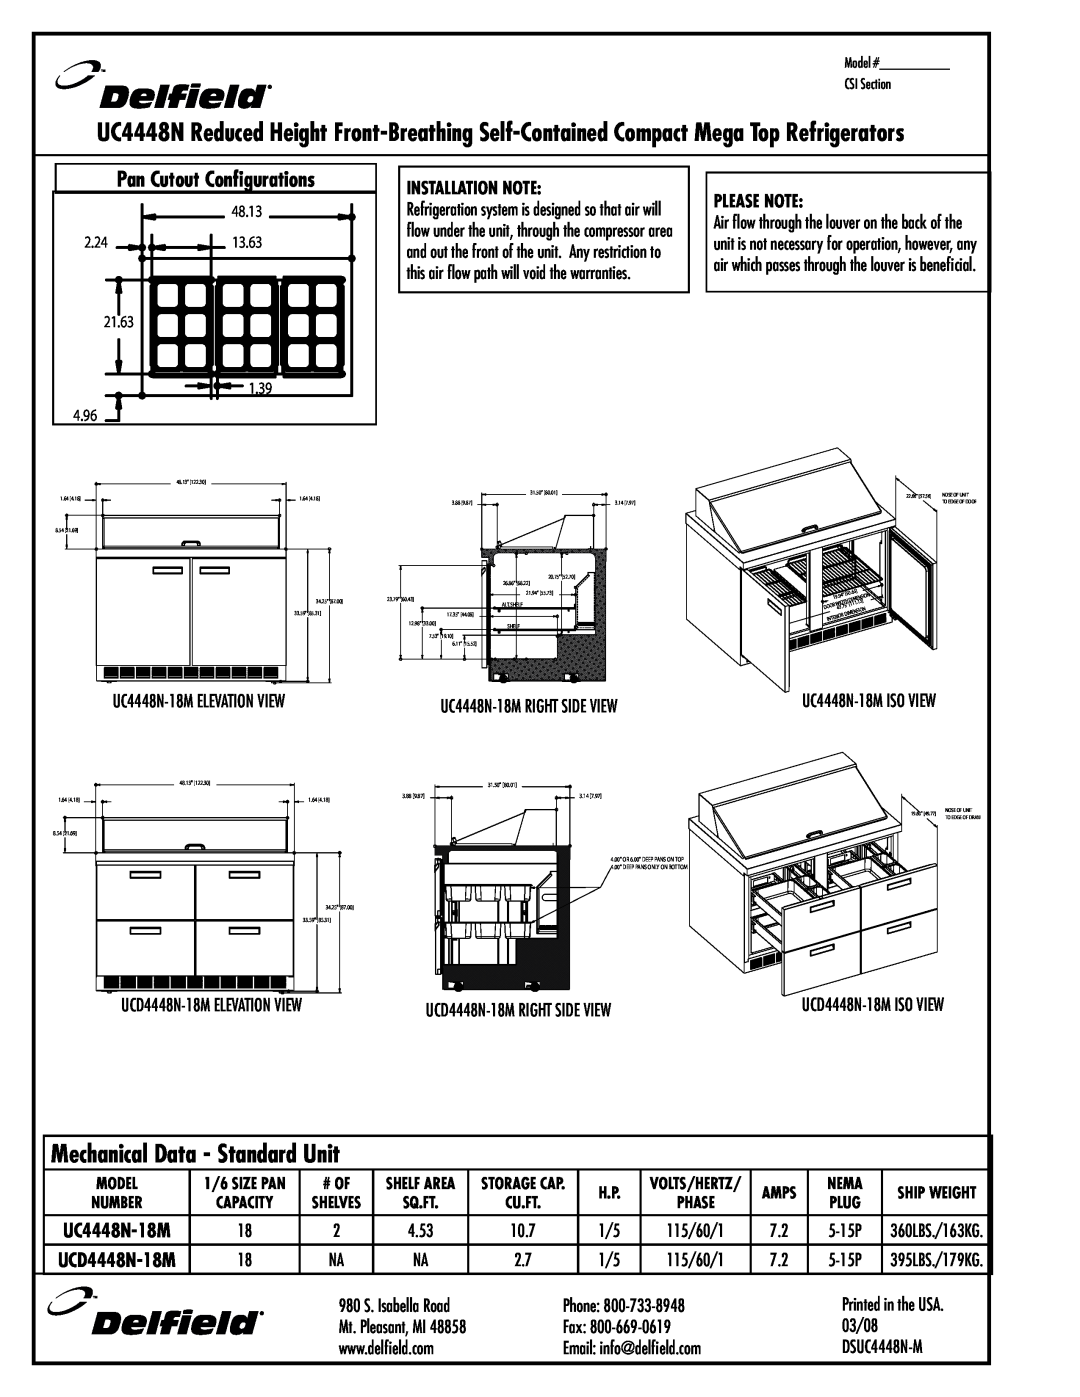 Delfield UC4448N-18M, UCD4448N-18M specifications Pan Cutout Configurations, Installation Note, Please Note, 10.7, 5-15P 